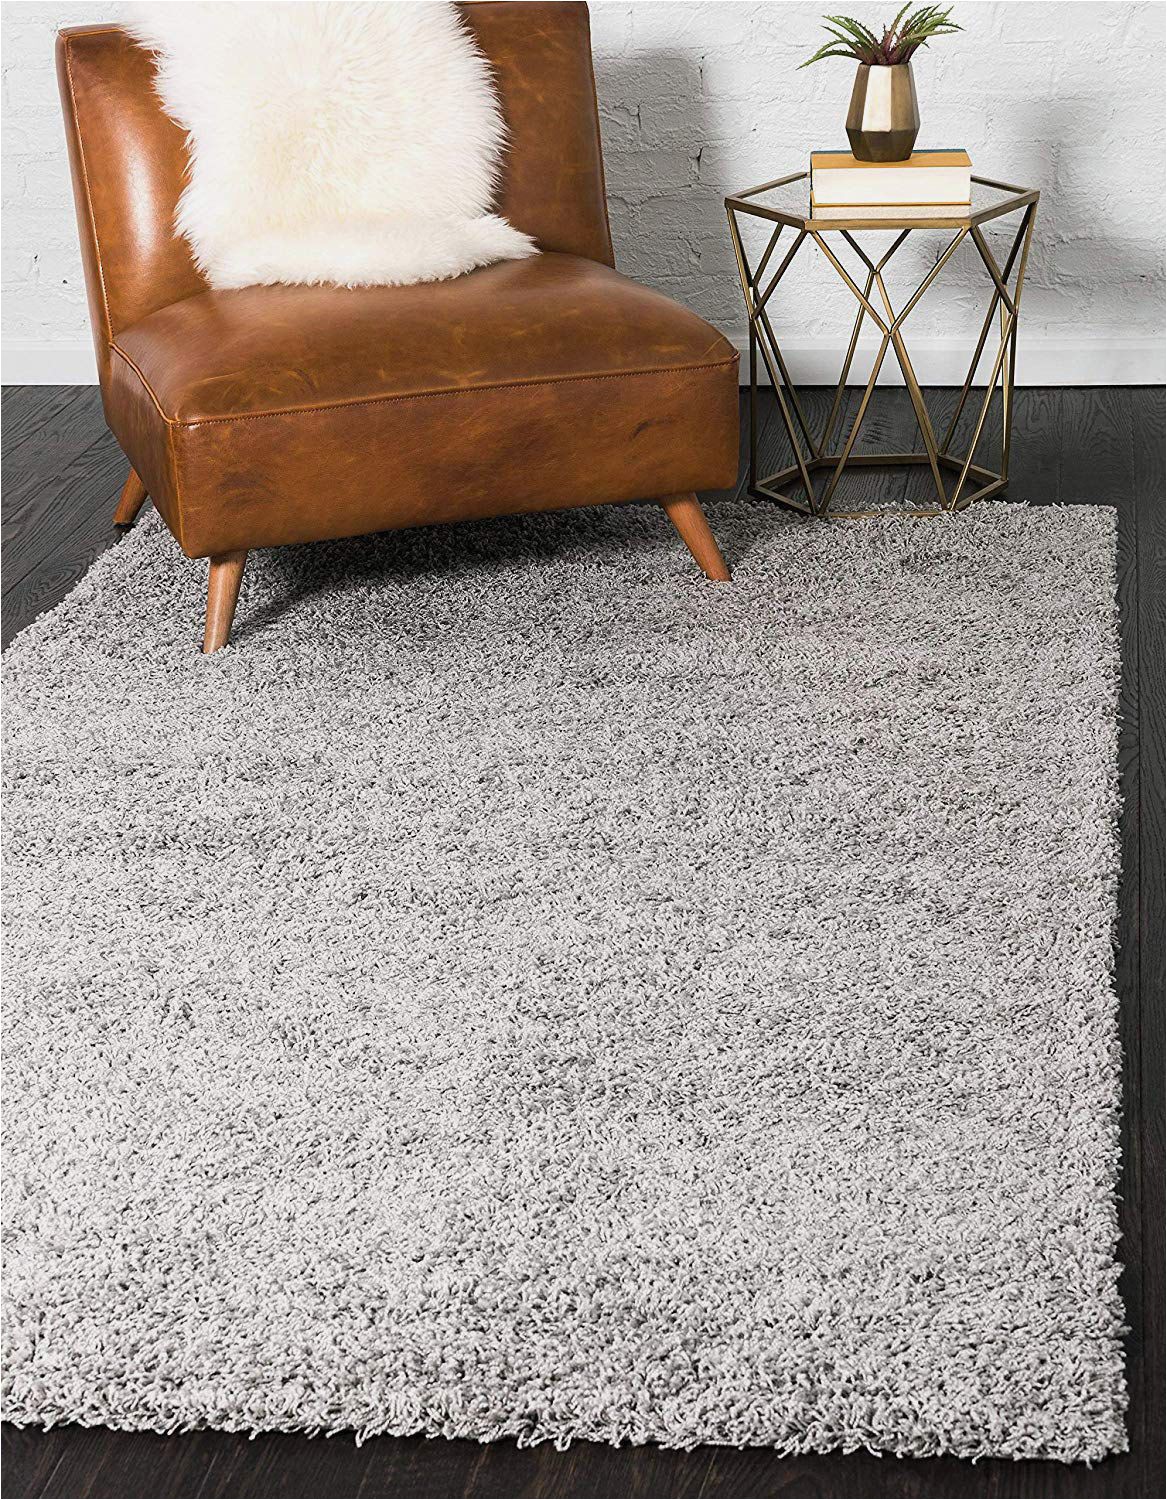 Soft and Plush area Rugs 11 Best area Rugs Under $200 2018 the Strategist